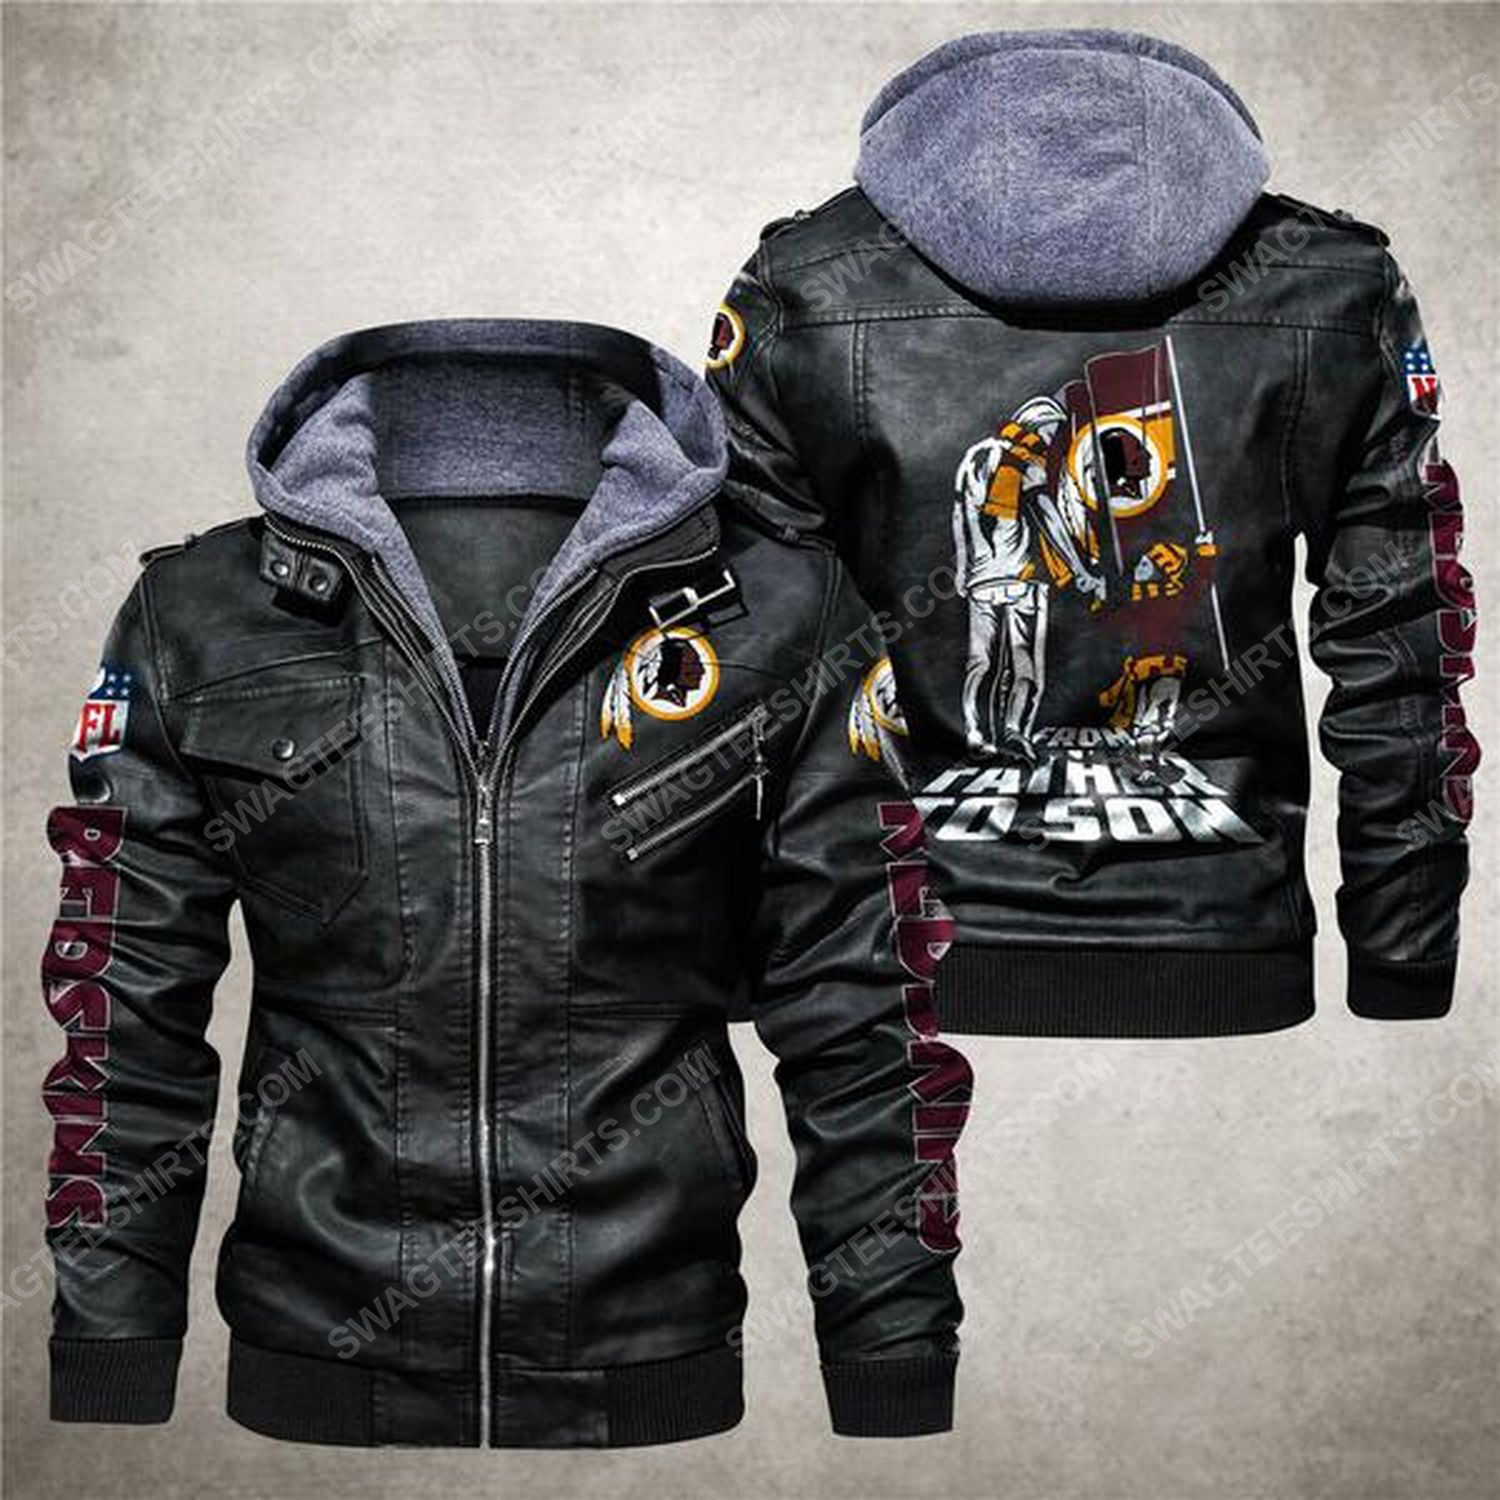 National football league washington redskins from father to son leather jacket - black